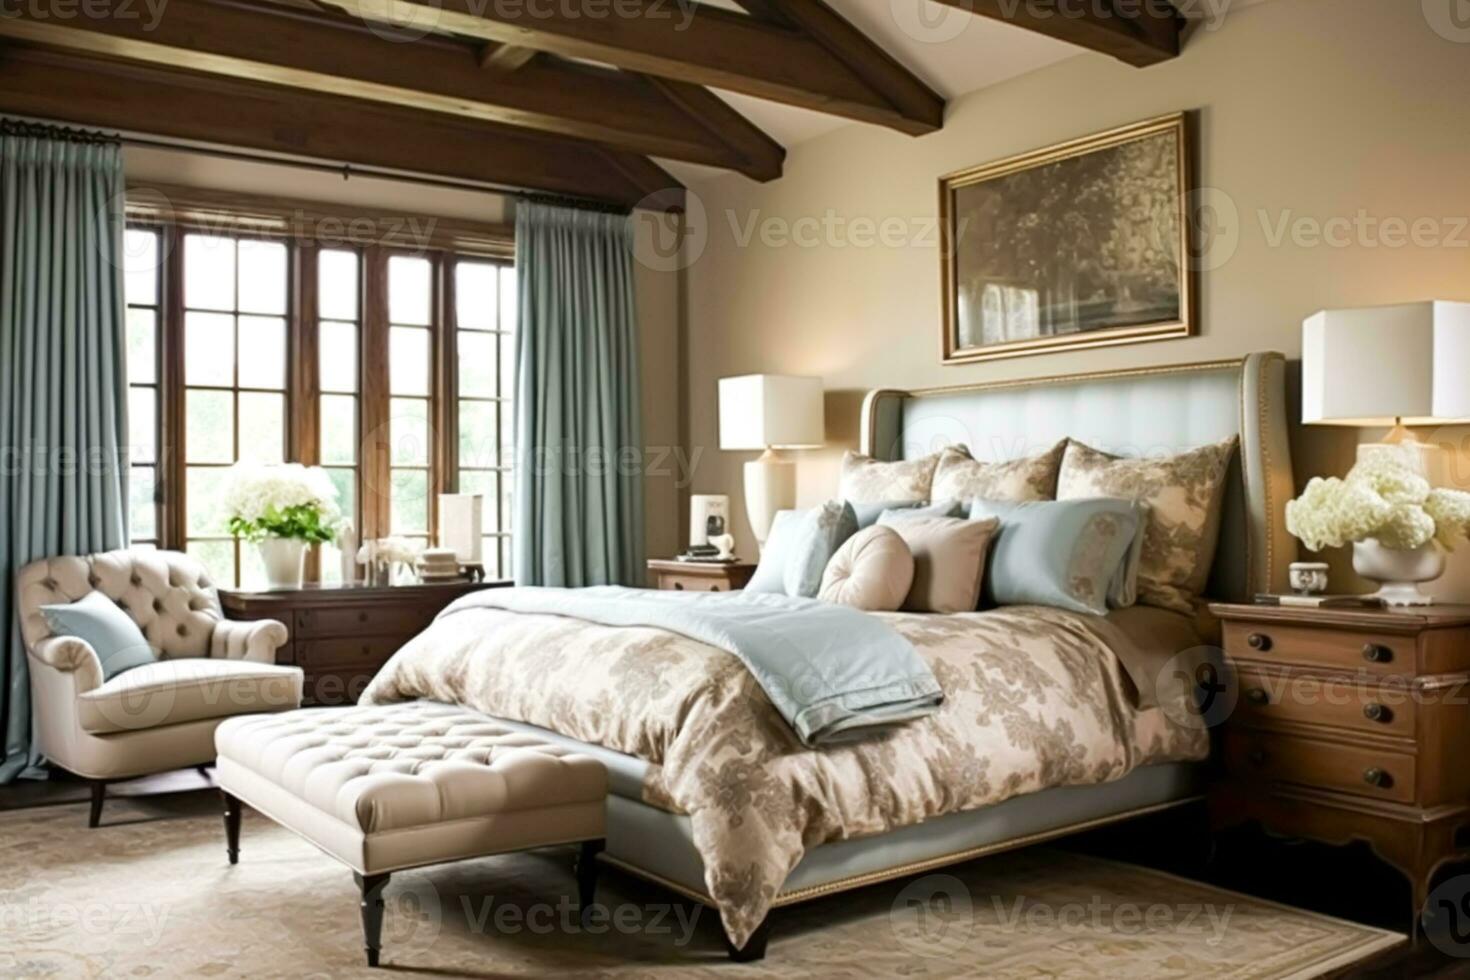 Bedroom decor, interior design and holiday rental, classic bed with elegant plush bedding and furniture, English country house and cottage style photo